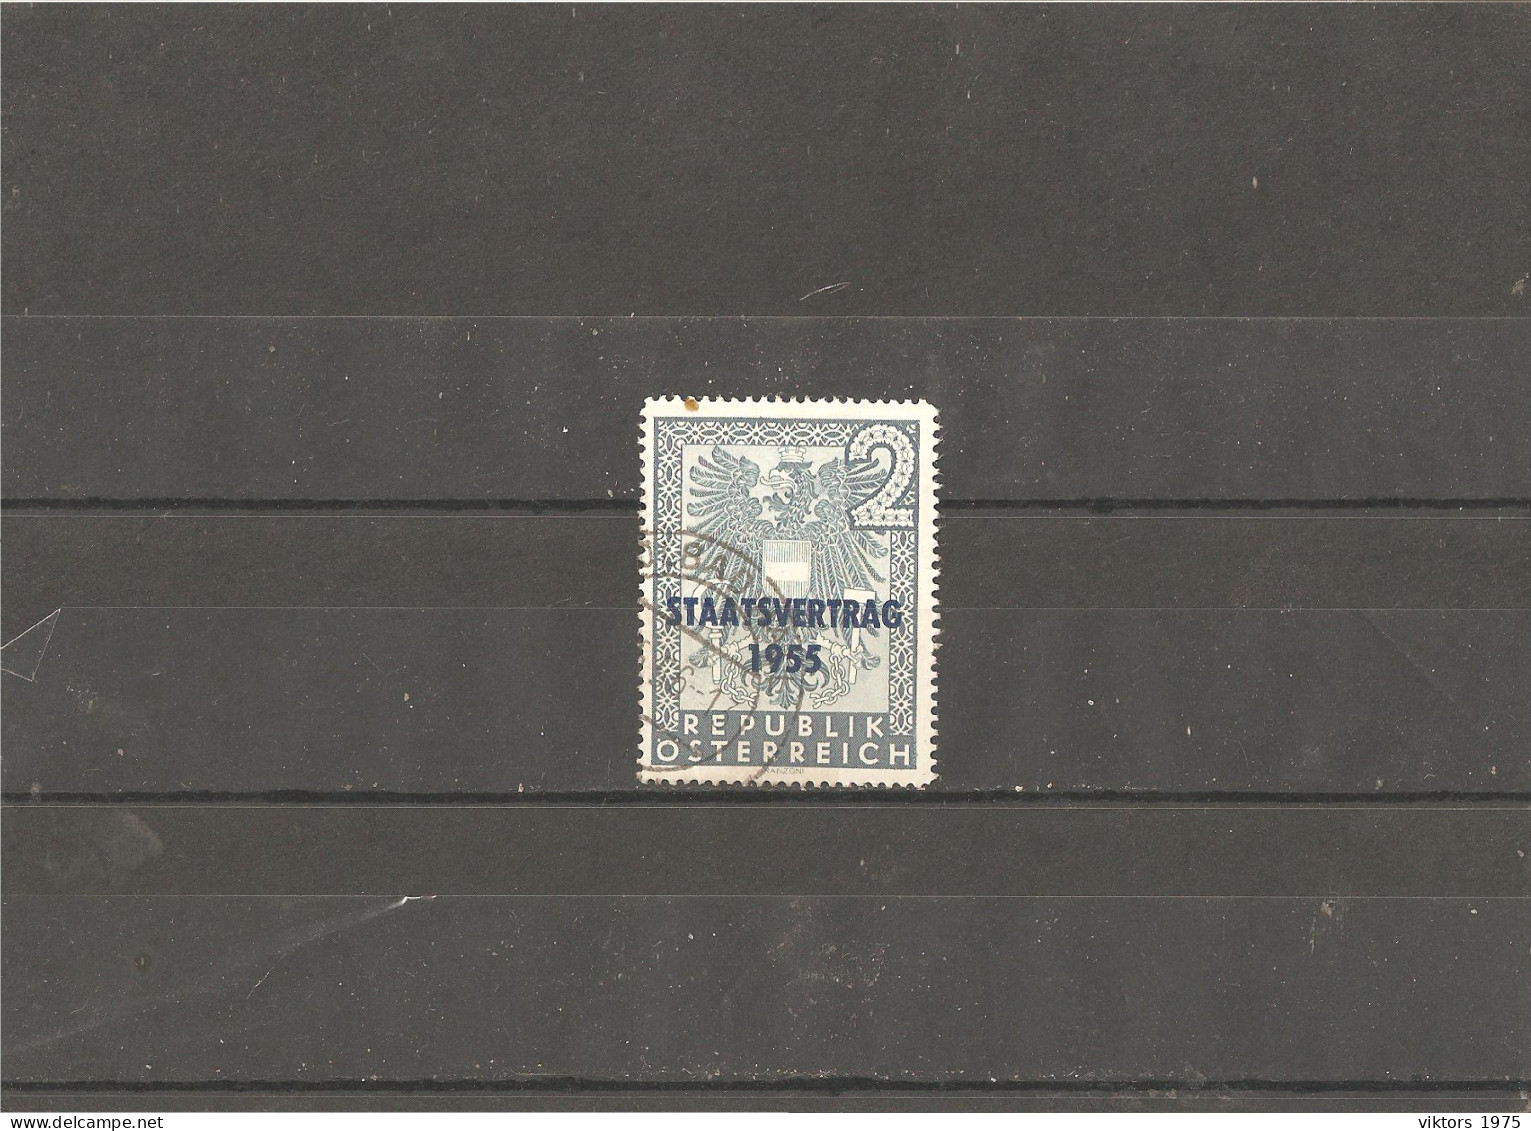 Used Stamp Nr.1017 In MICHEL Catalog - Used Stamps